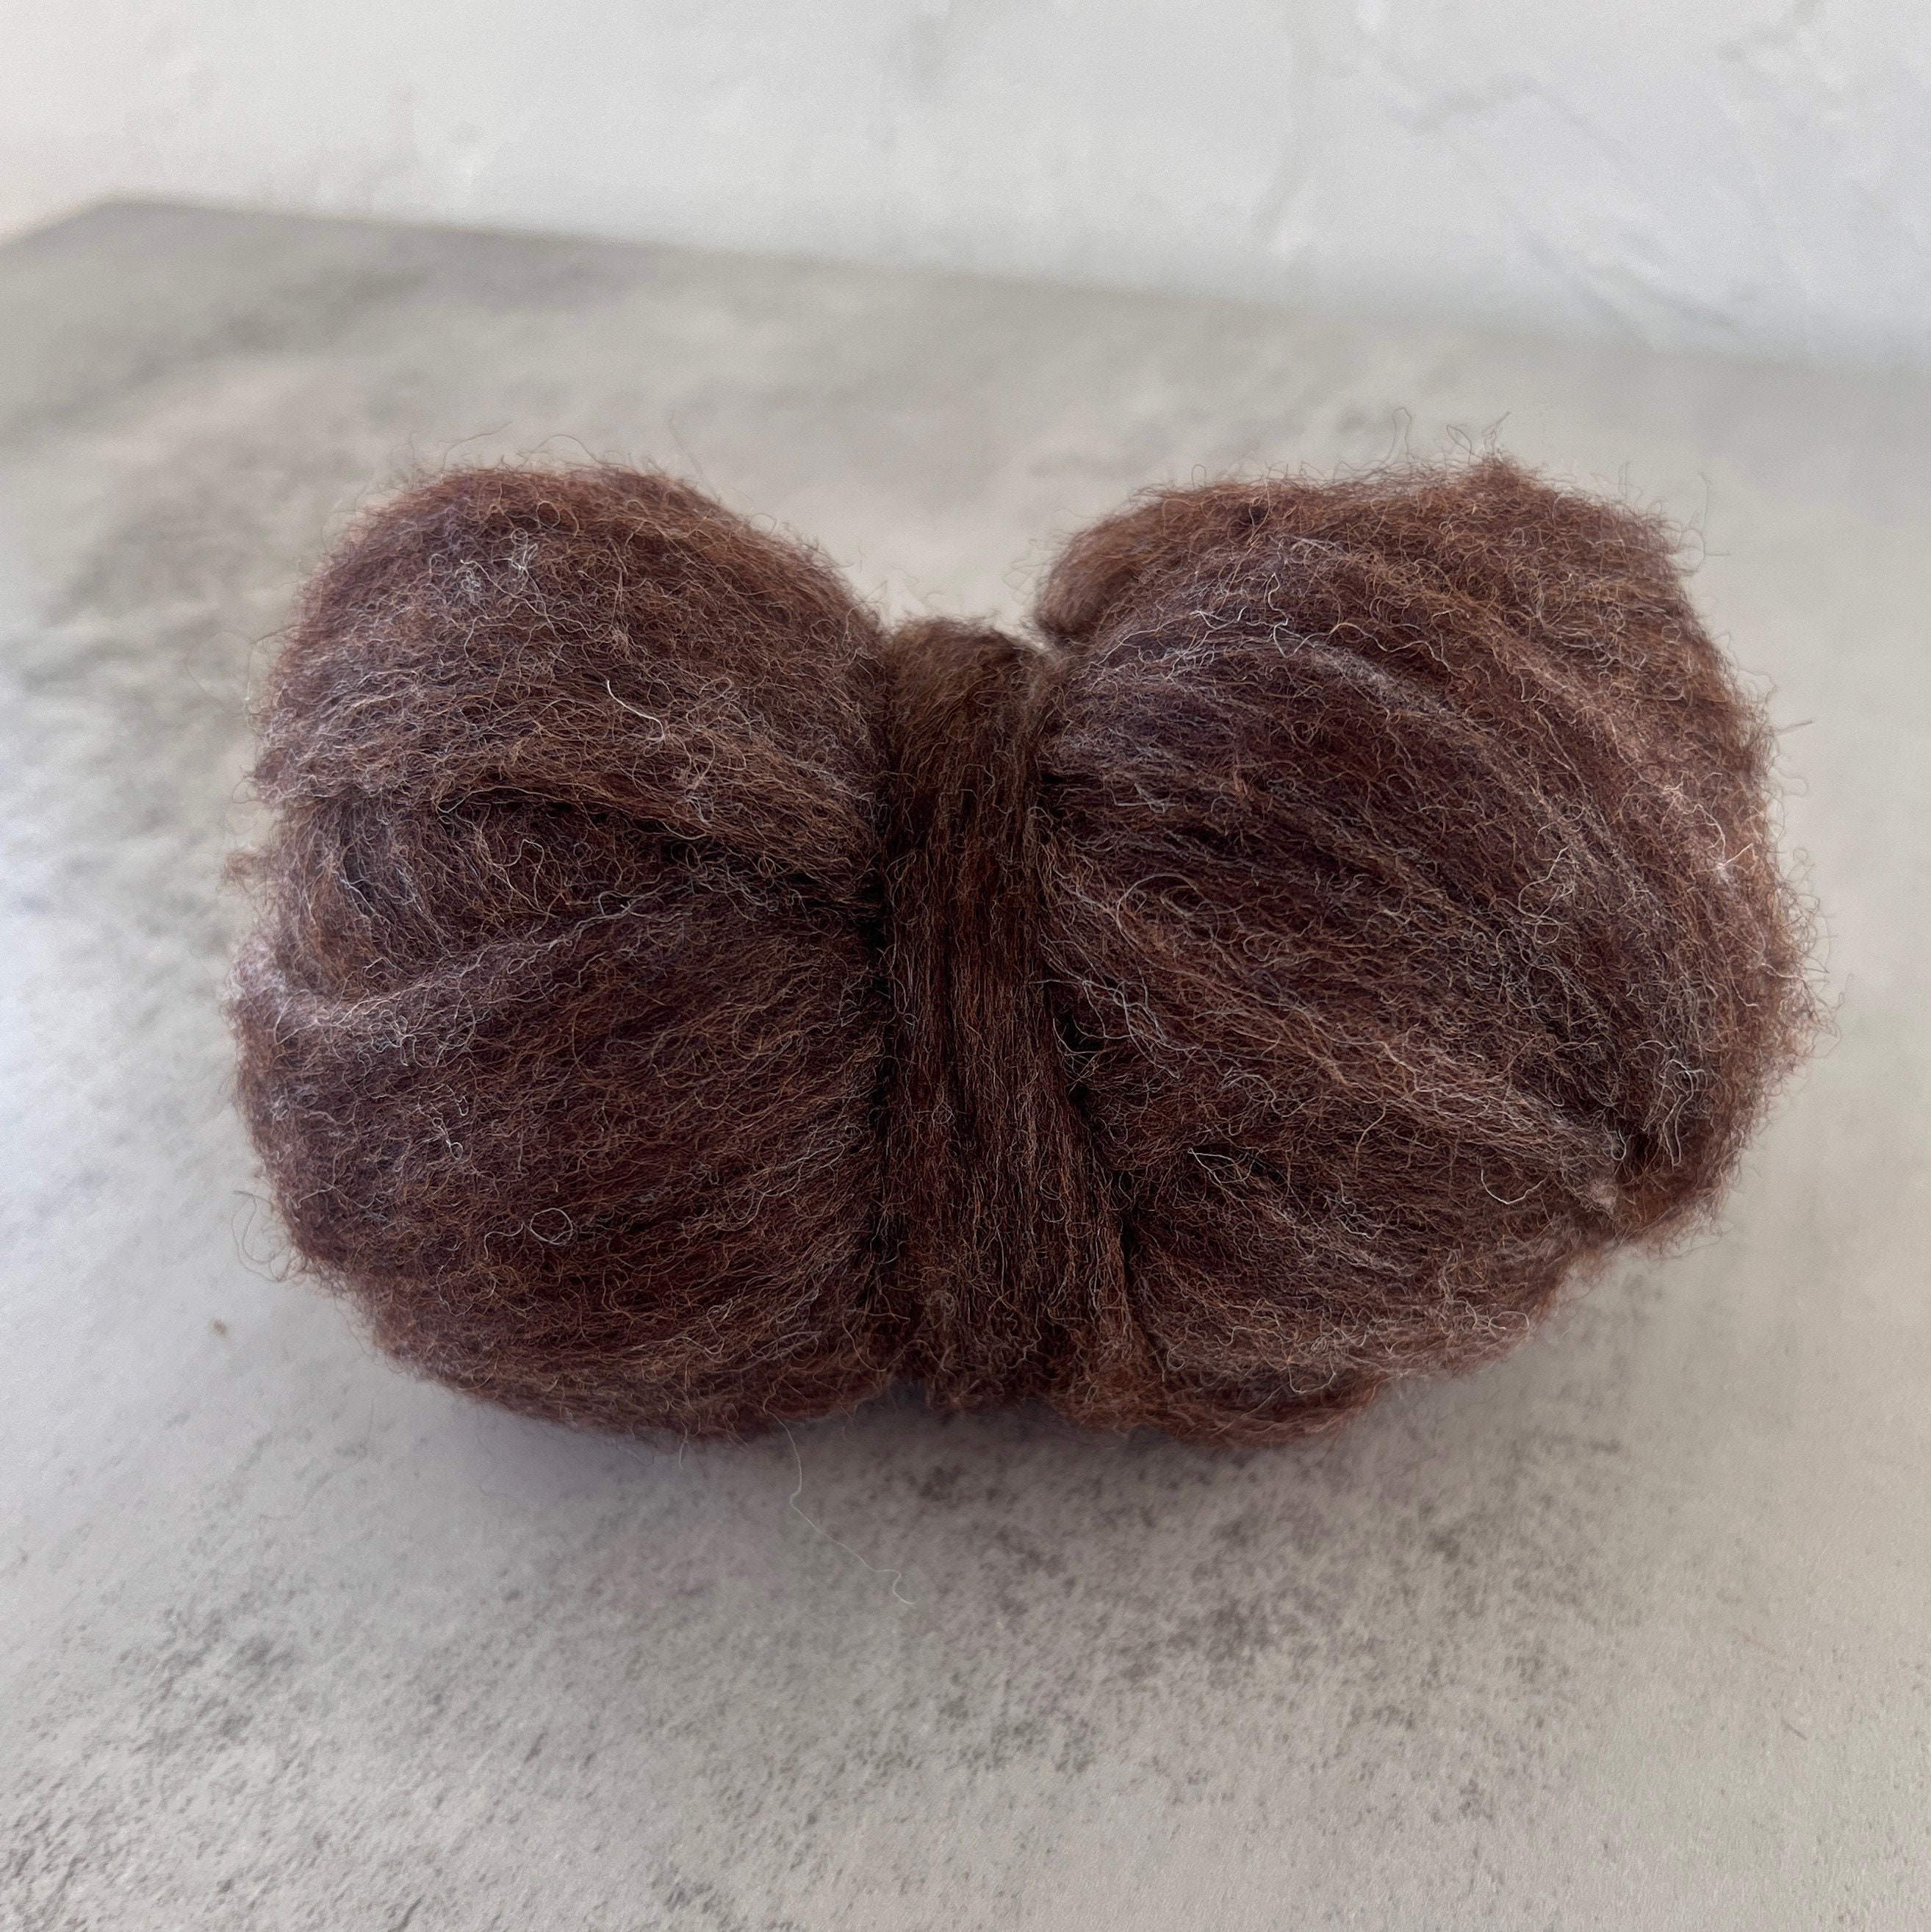 2oz Carded Corriedale in Fox, Wool Roving for Needle Felting 